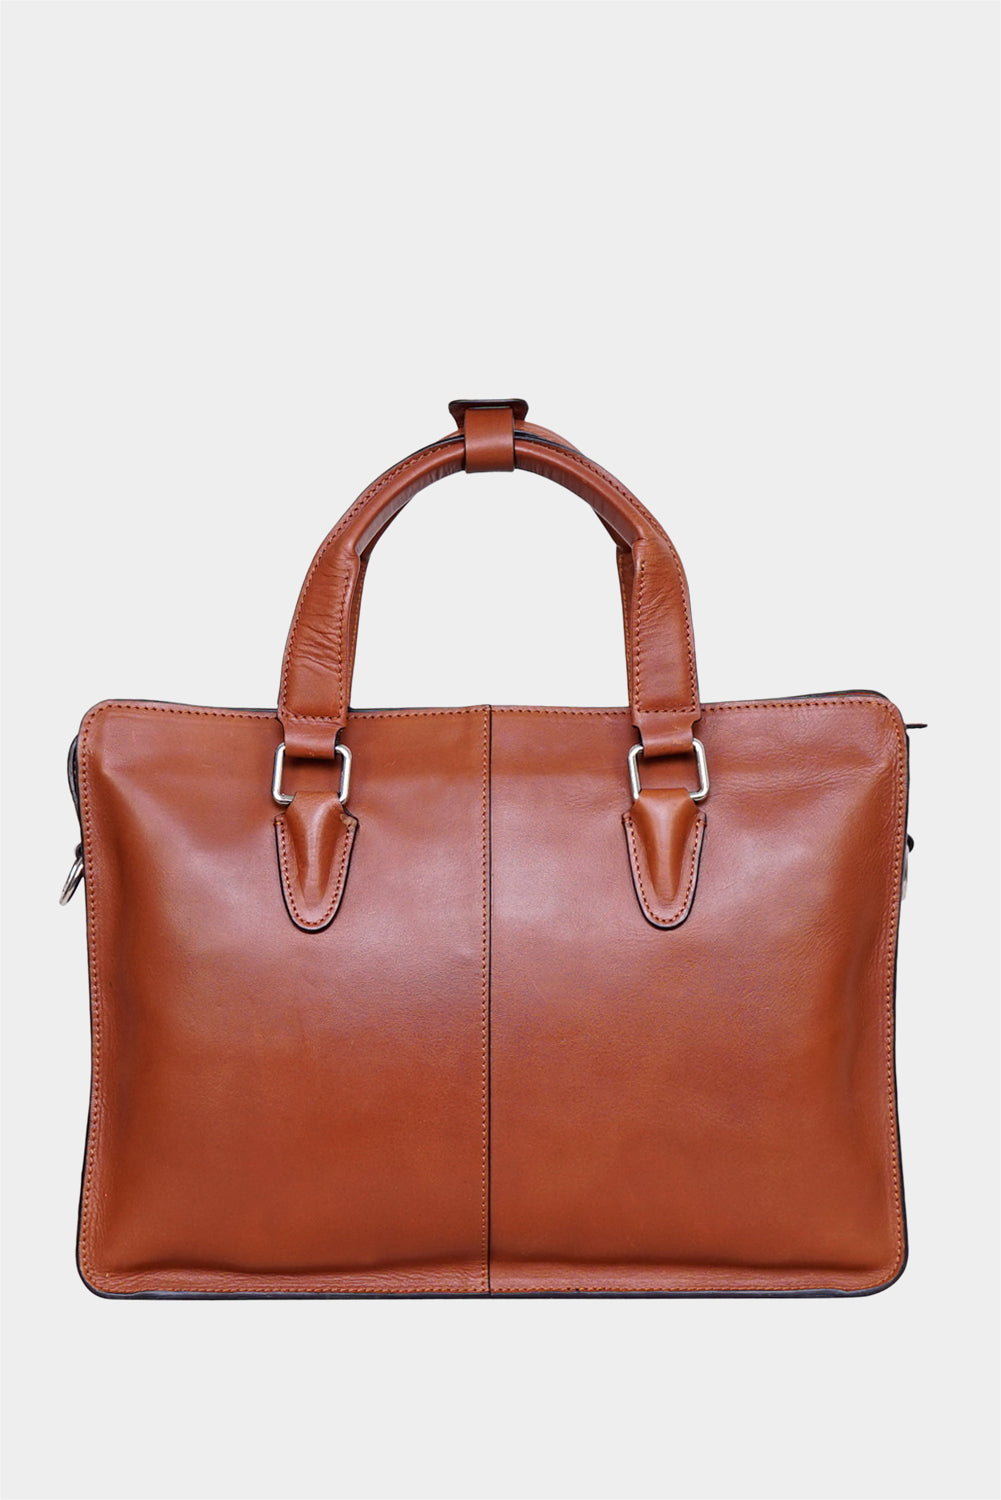 Leather AWOL Bag 2.0 | Duluth Trading Company